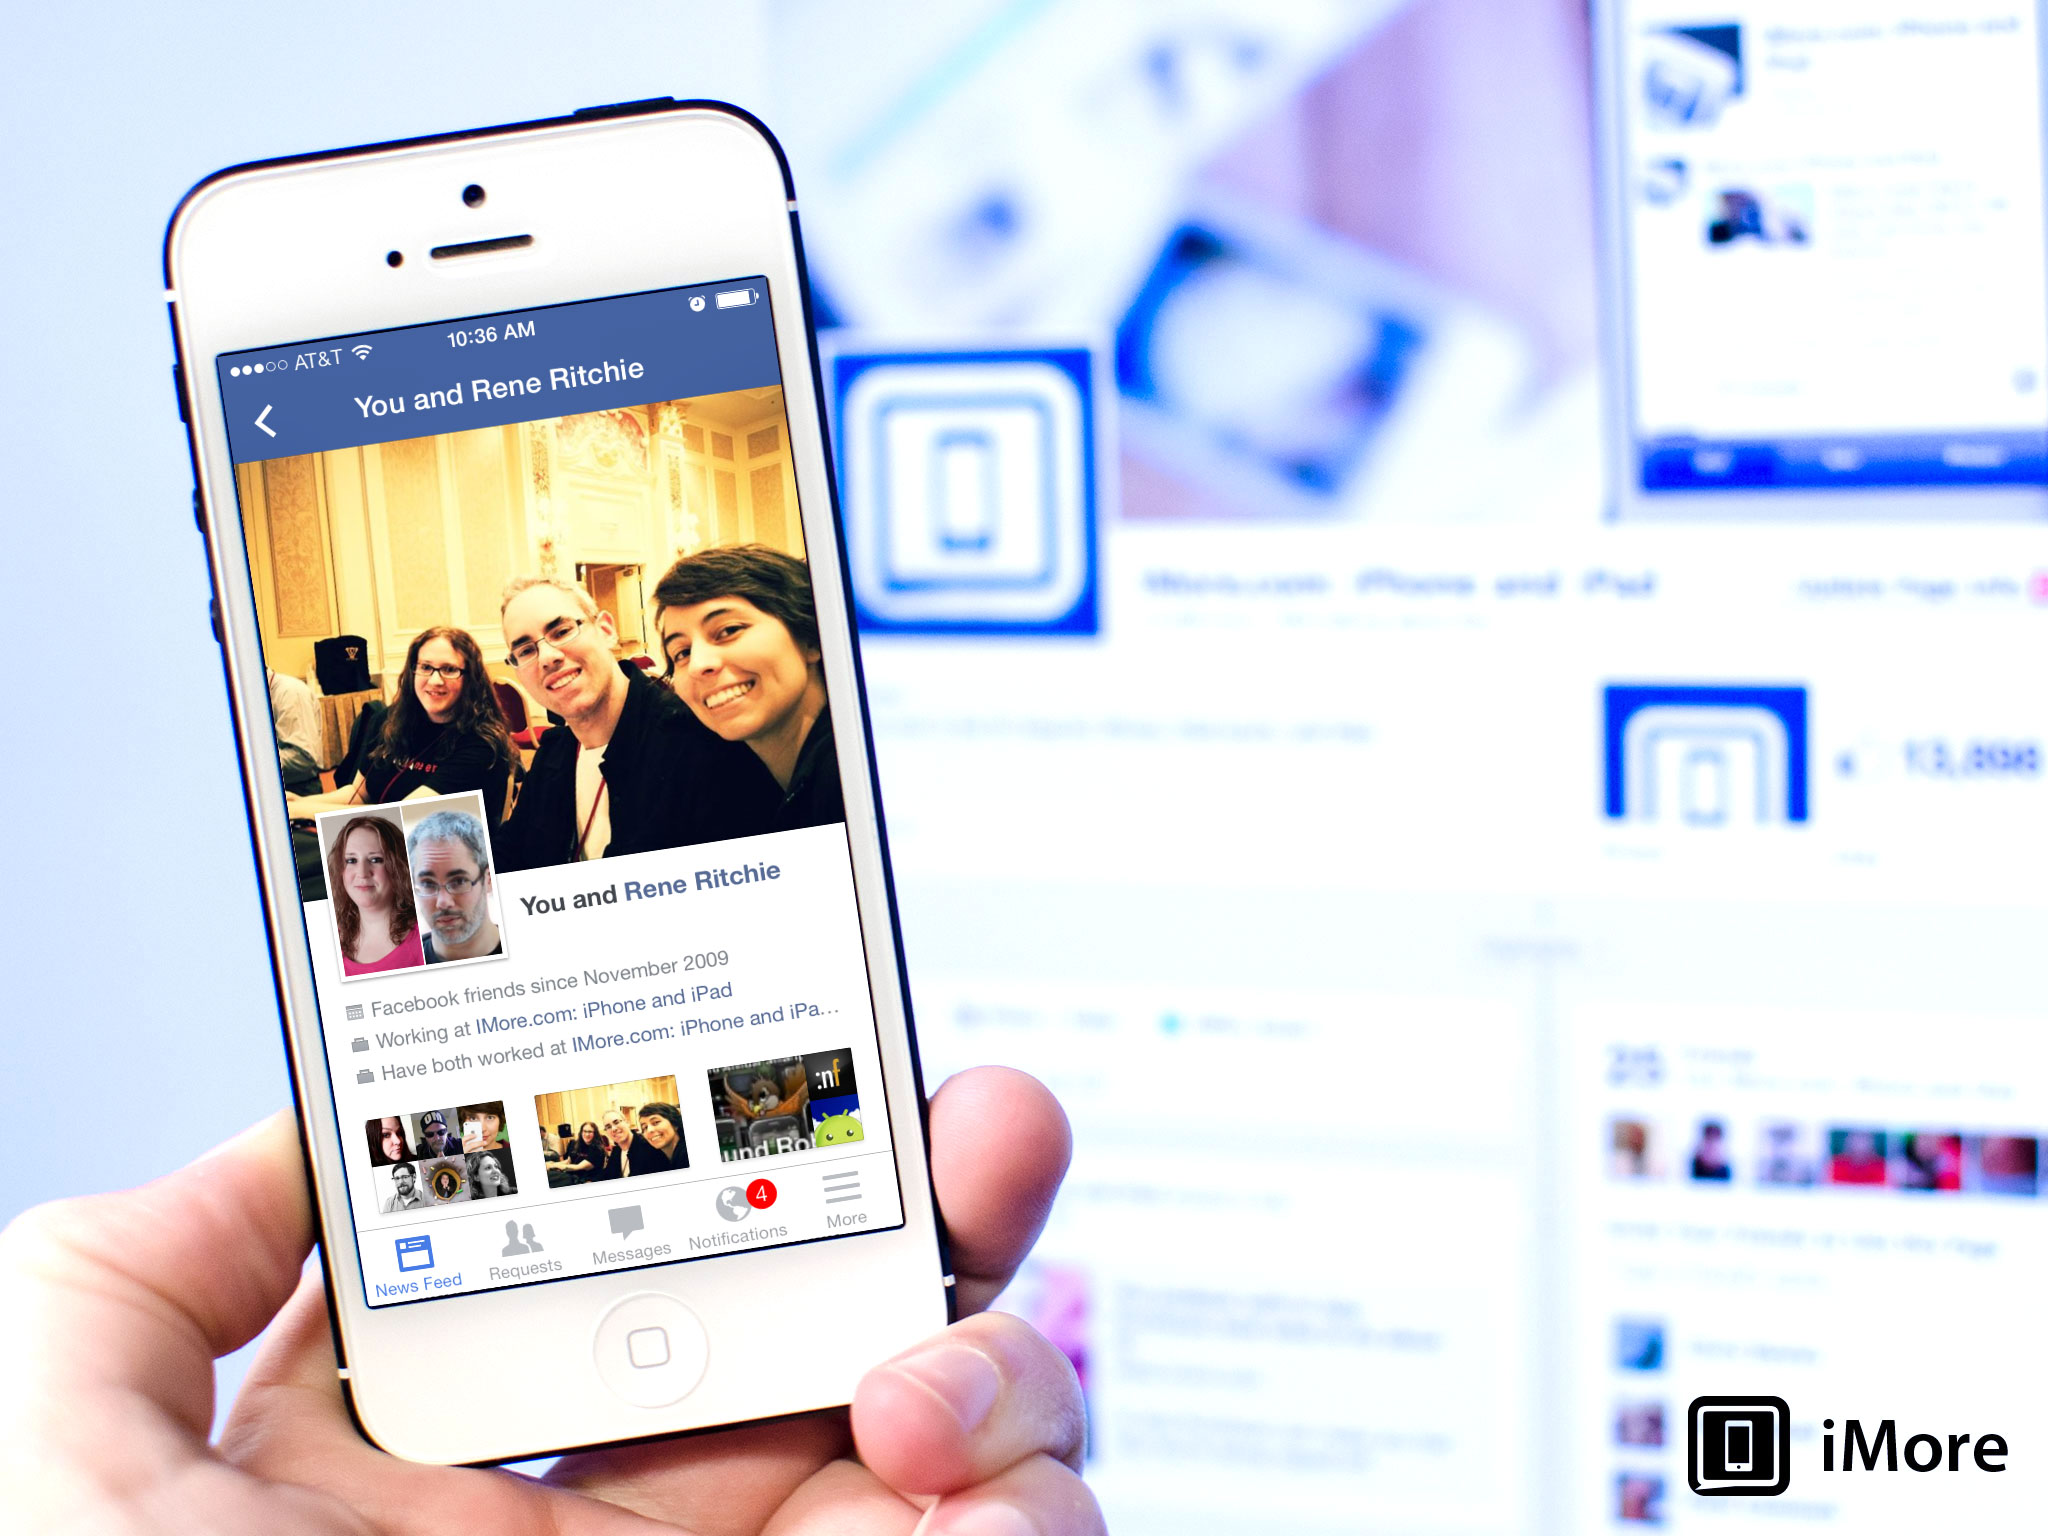 How to view friendships with Facebook for iPhone and iPad